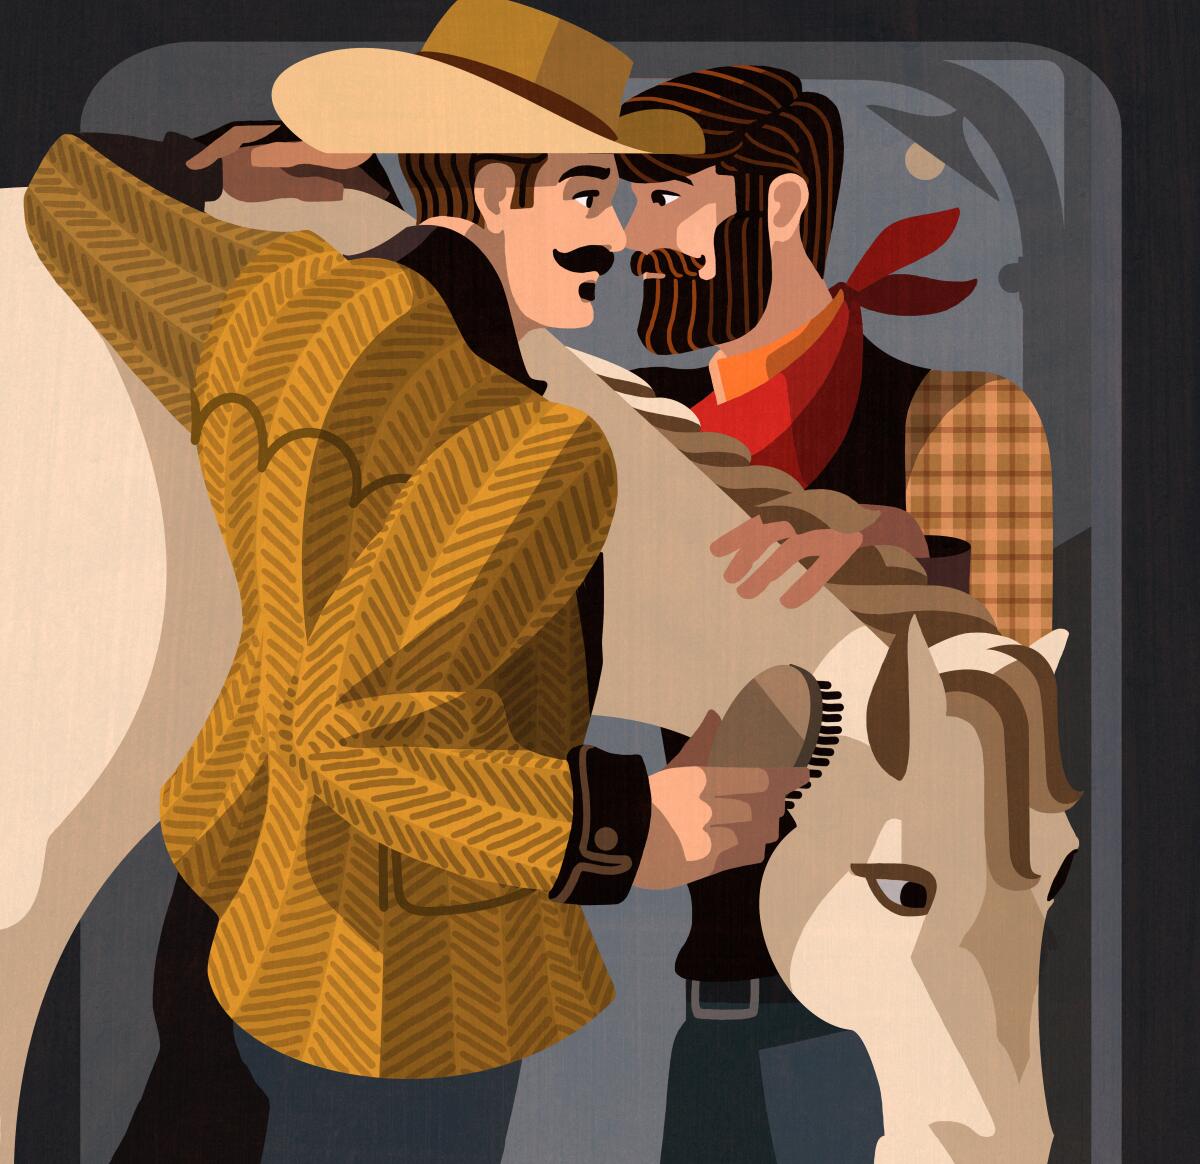 An illustration of two cowboys gazing romantically at each other.